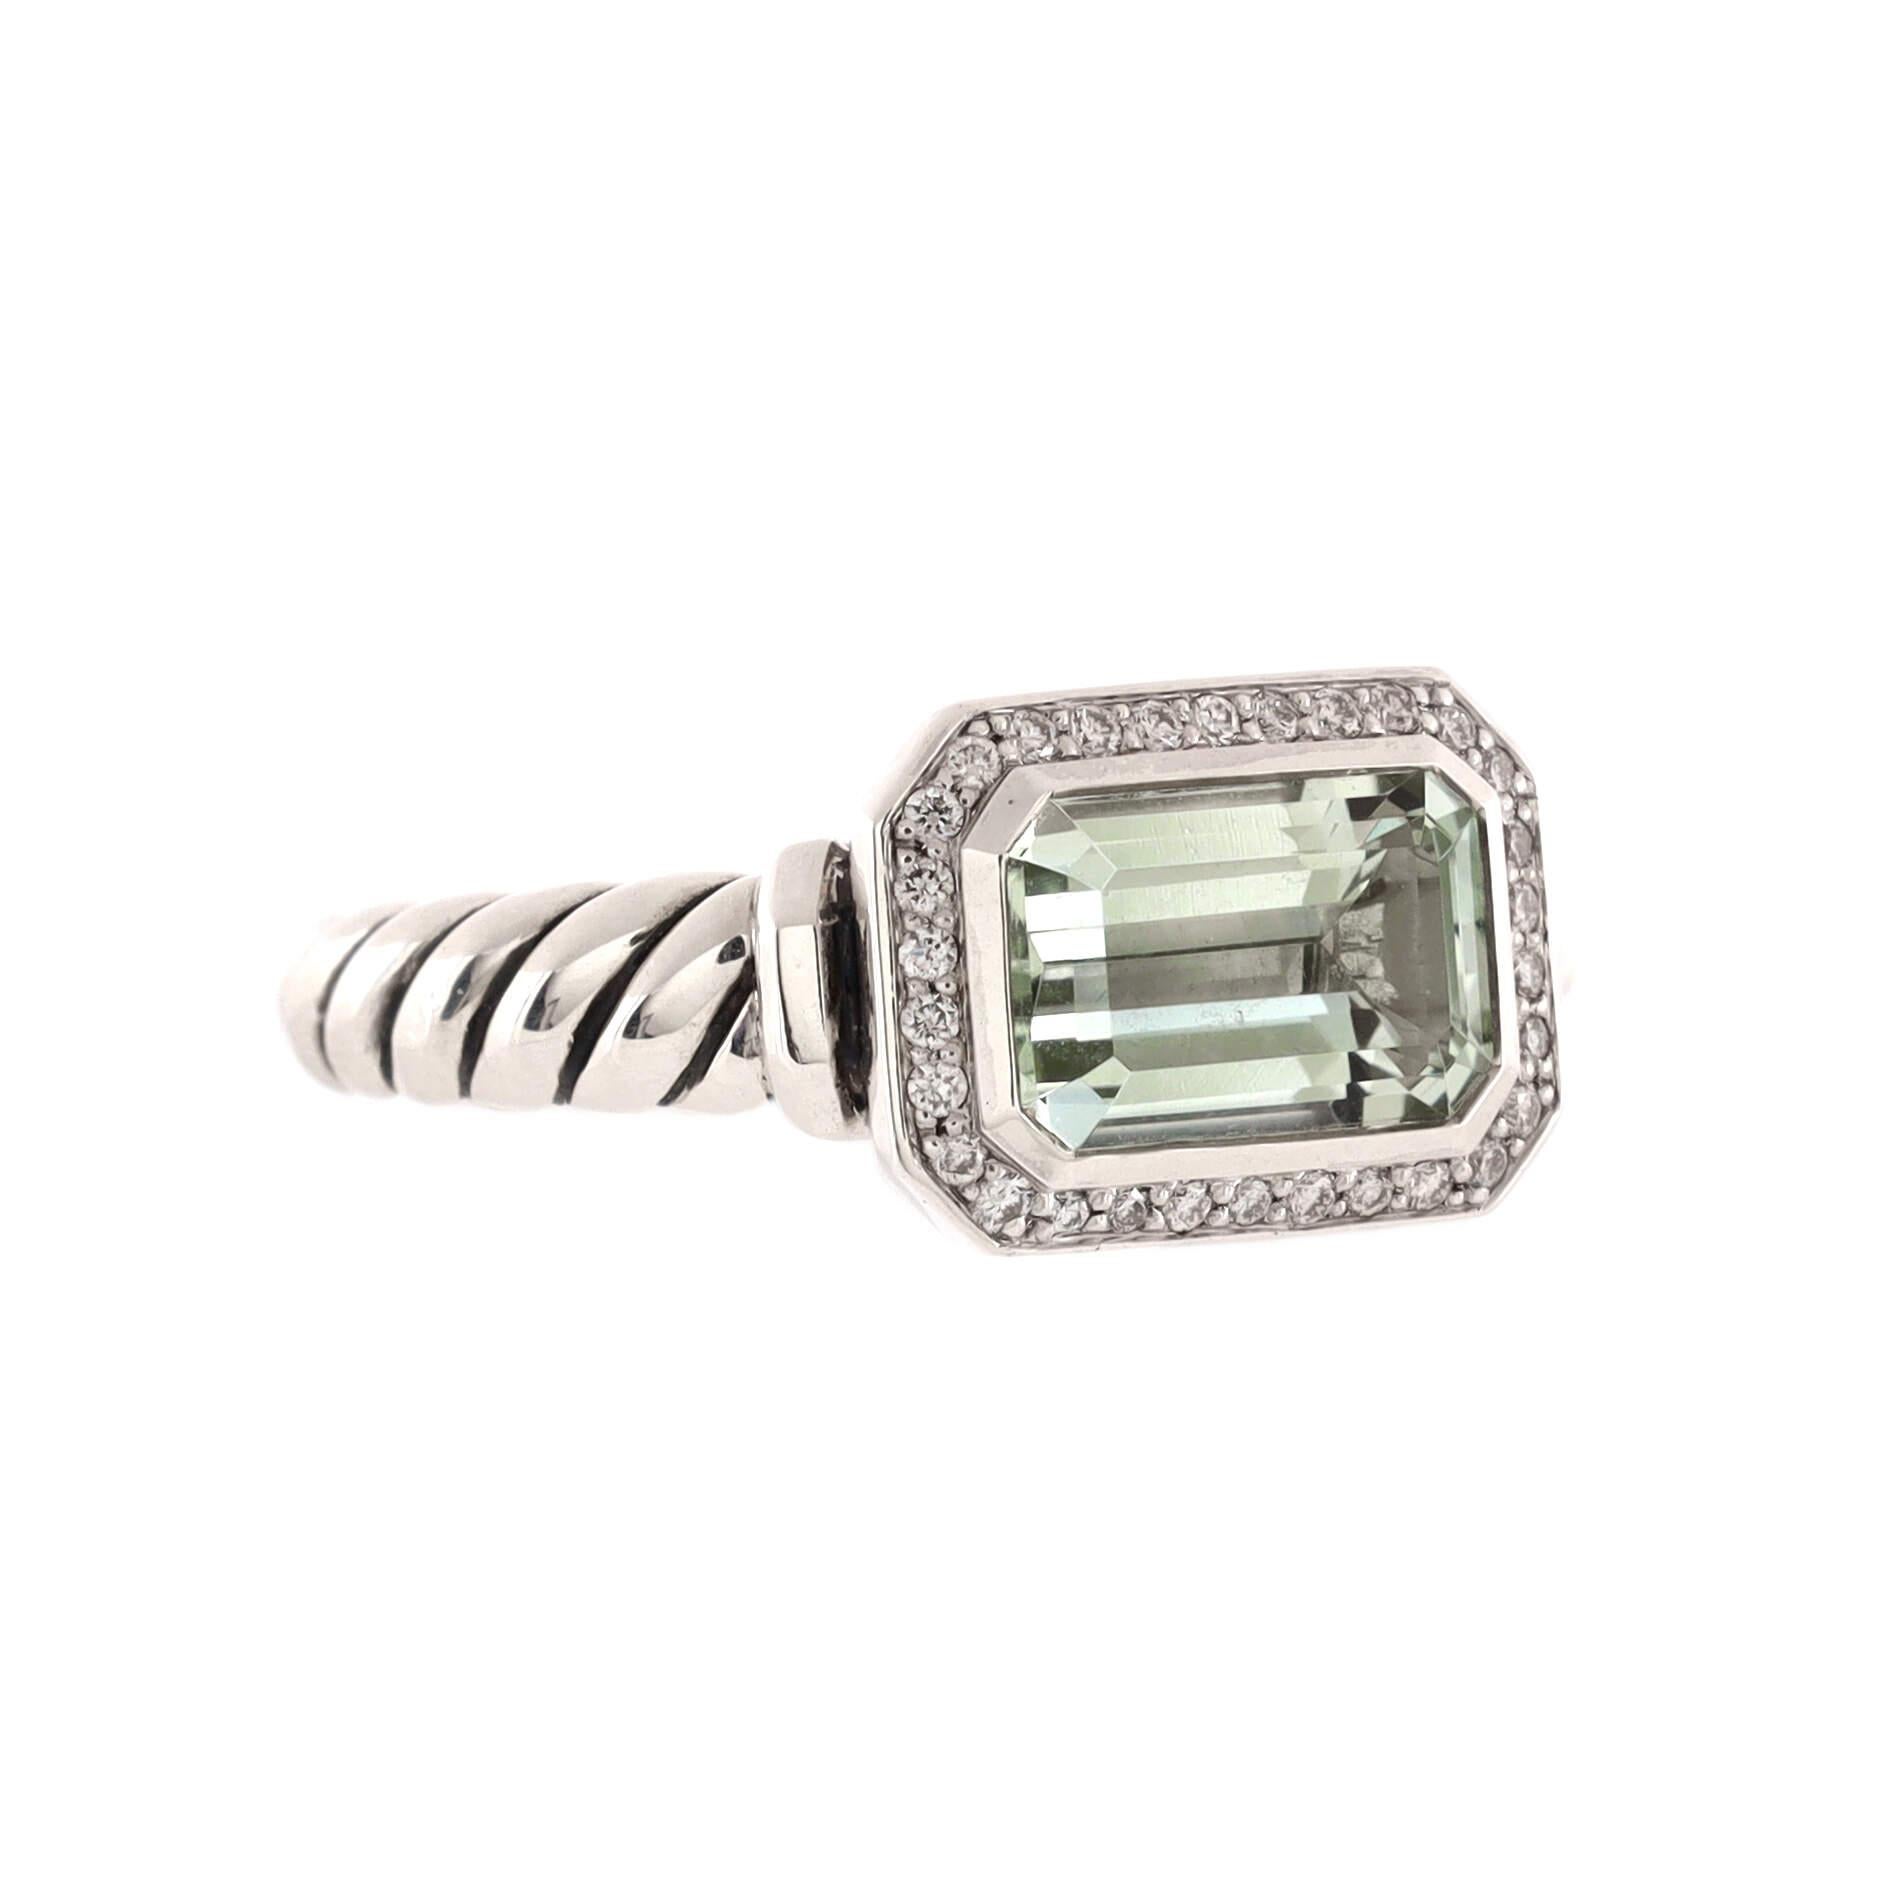 Condition: Great. Minor wear throughout.
Accessories: No Accessories
Measurements: Size: 7.25 - 55, Width: 3.05 mm
Designer: David Yurman
Model: Novella Statement Ring Sterling Silver with Prasiolite and Diamonds
Exterior Color: Silver
Item Number: